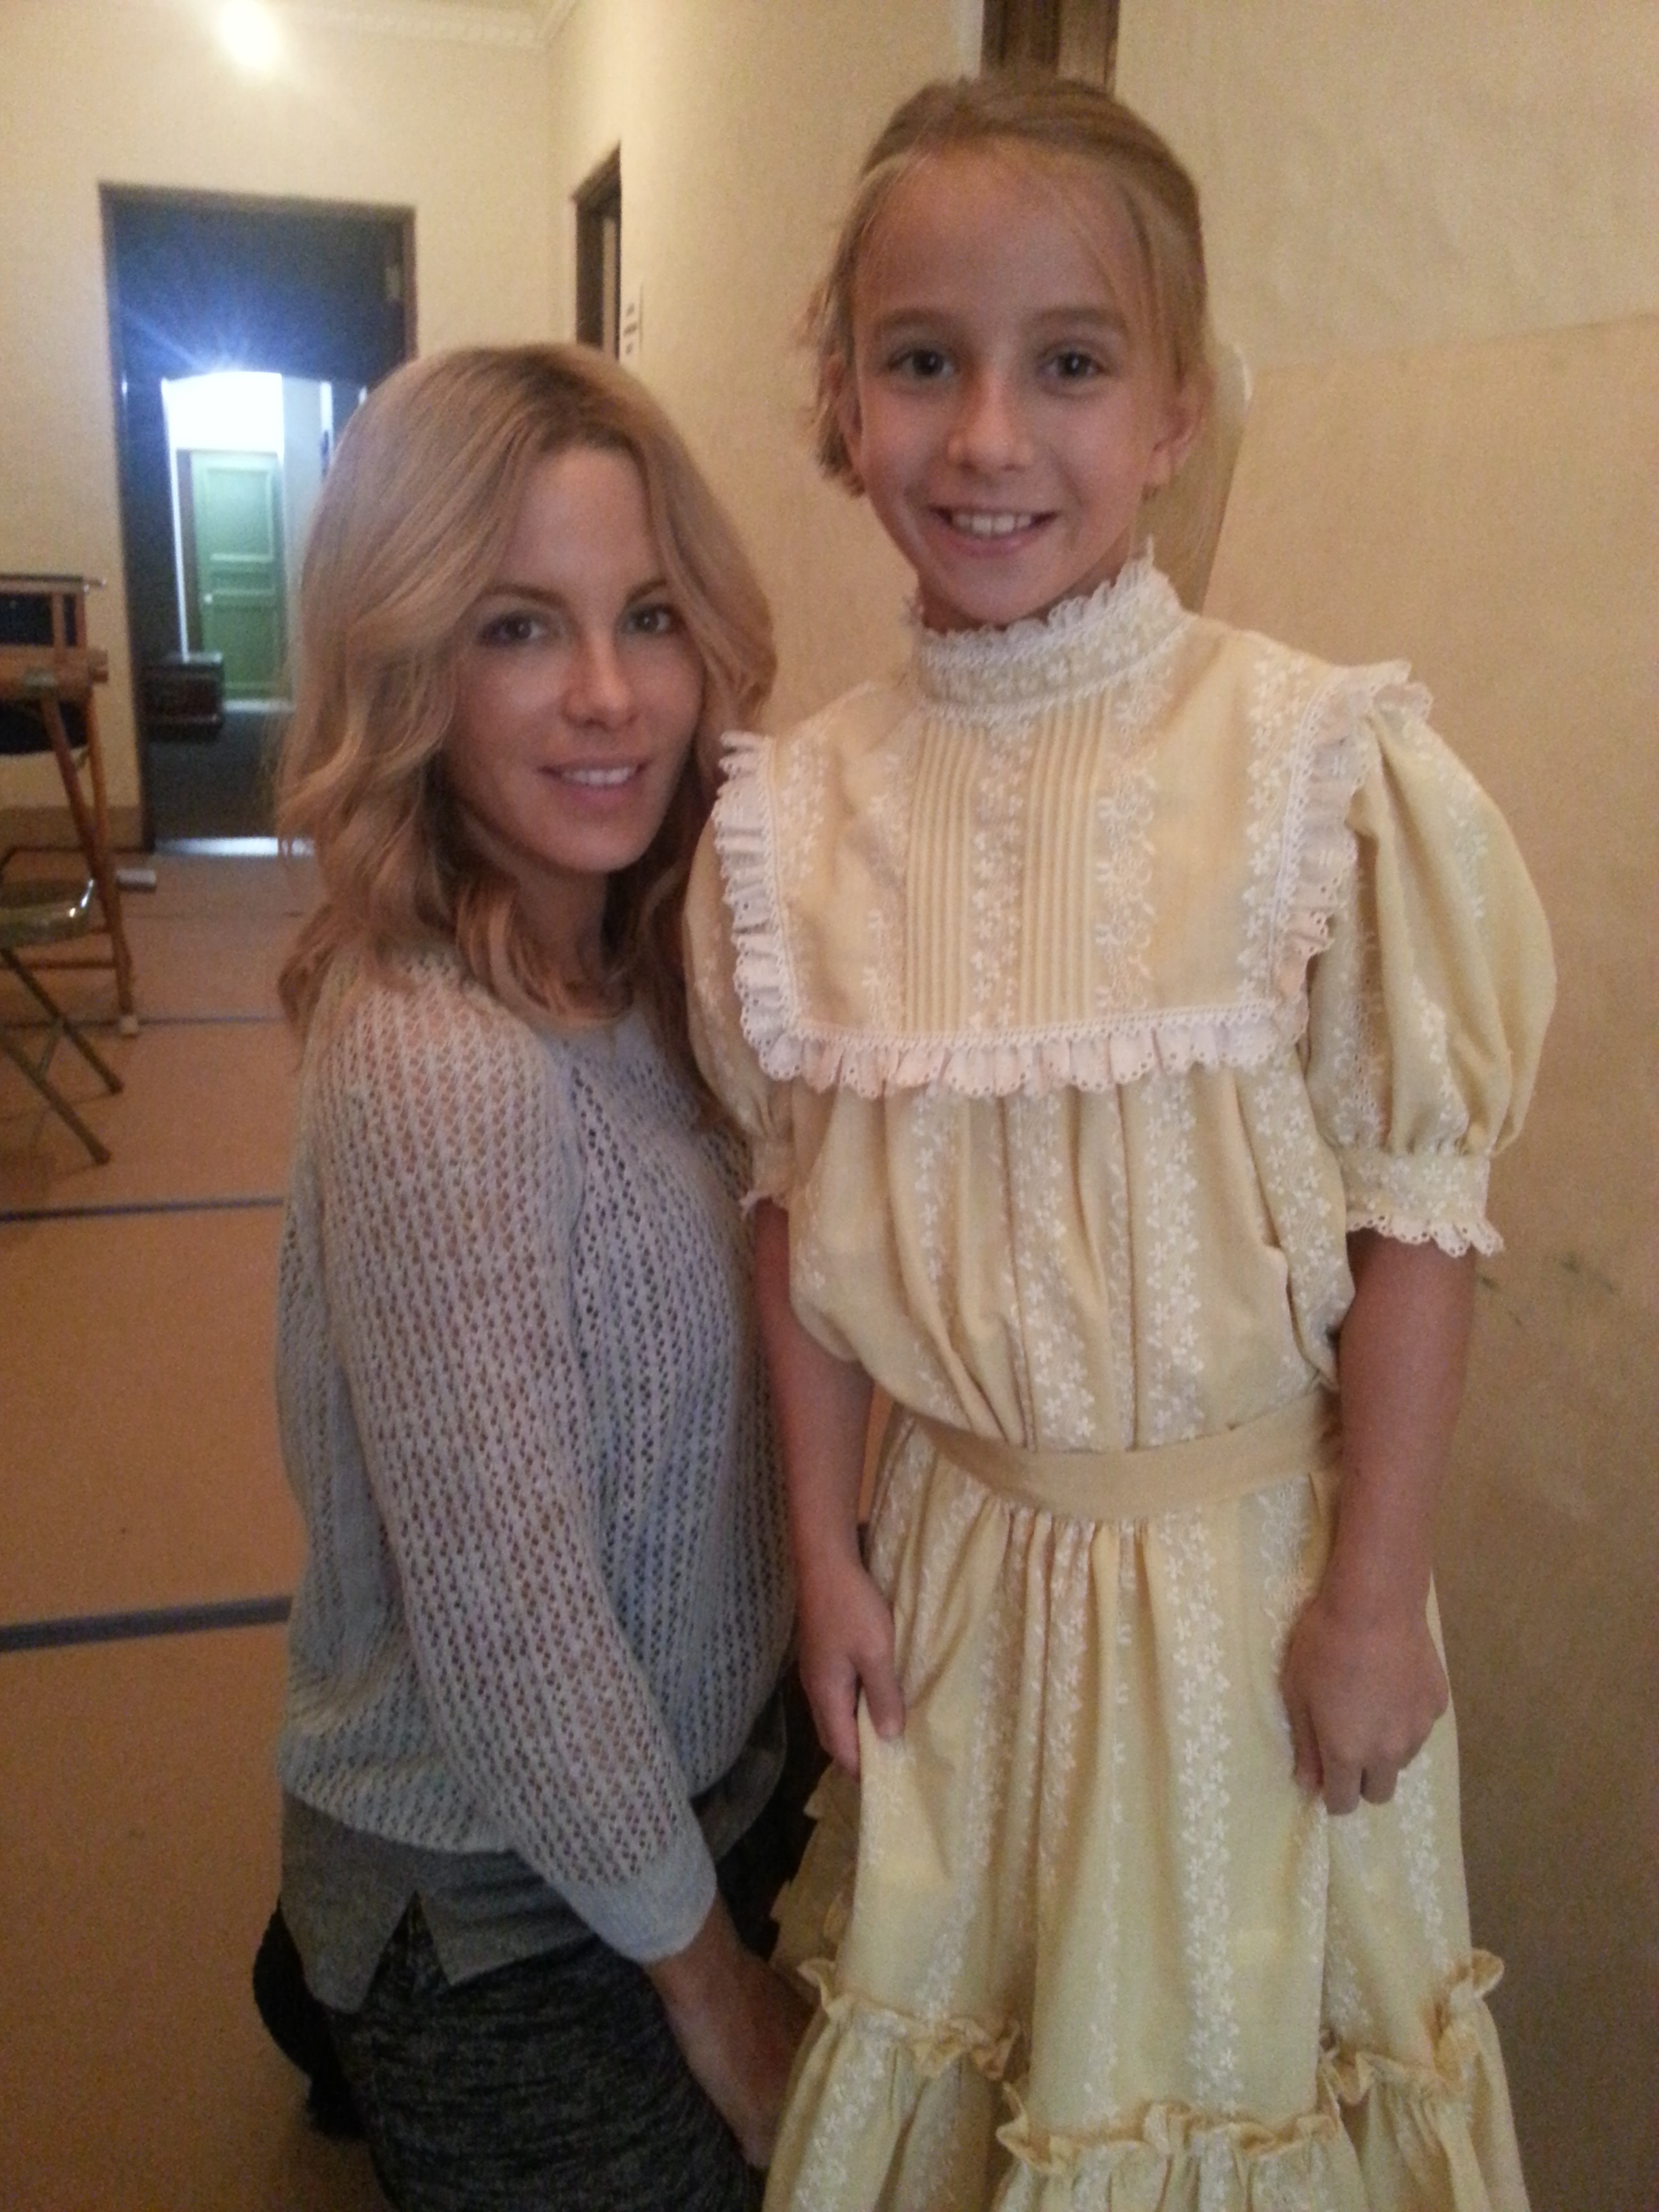 Paris with Kate Beckinsale - on set of The Disappointments Room